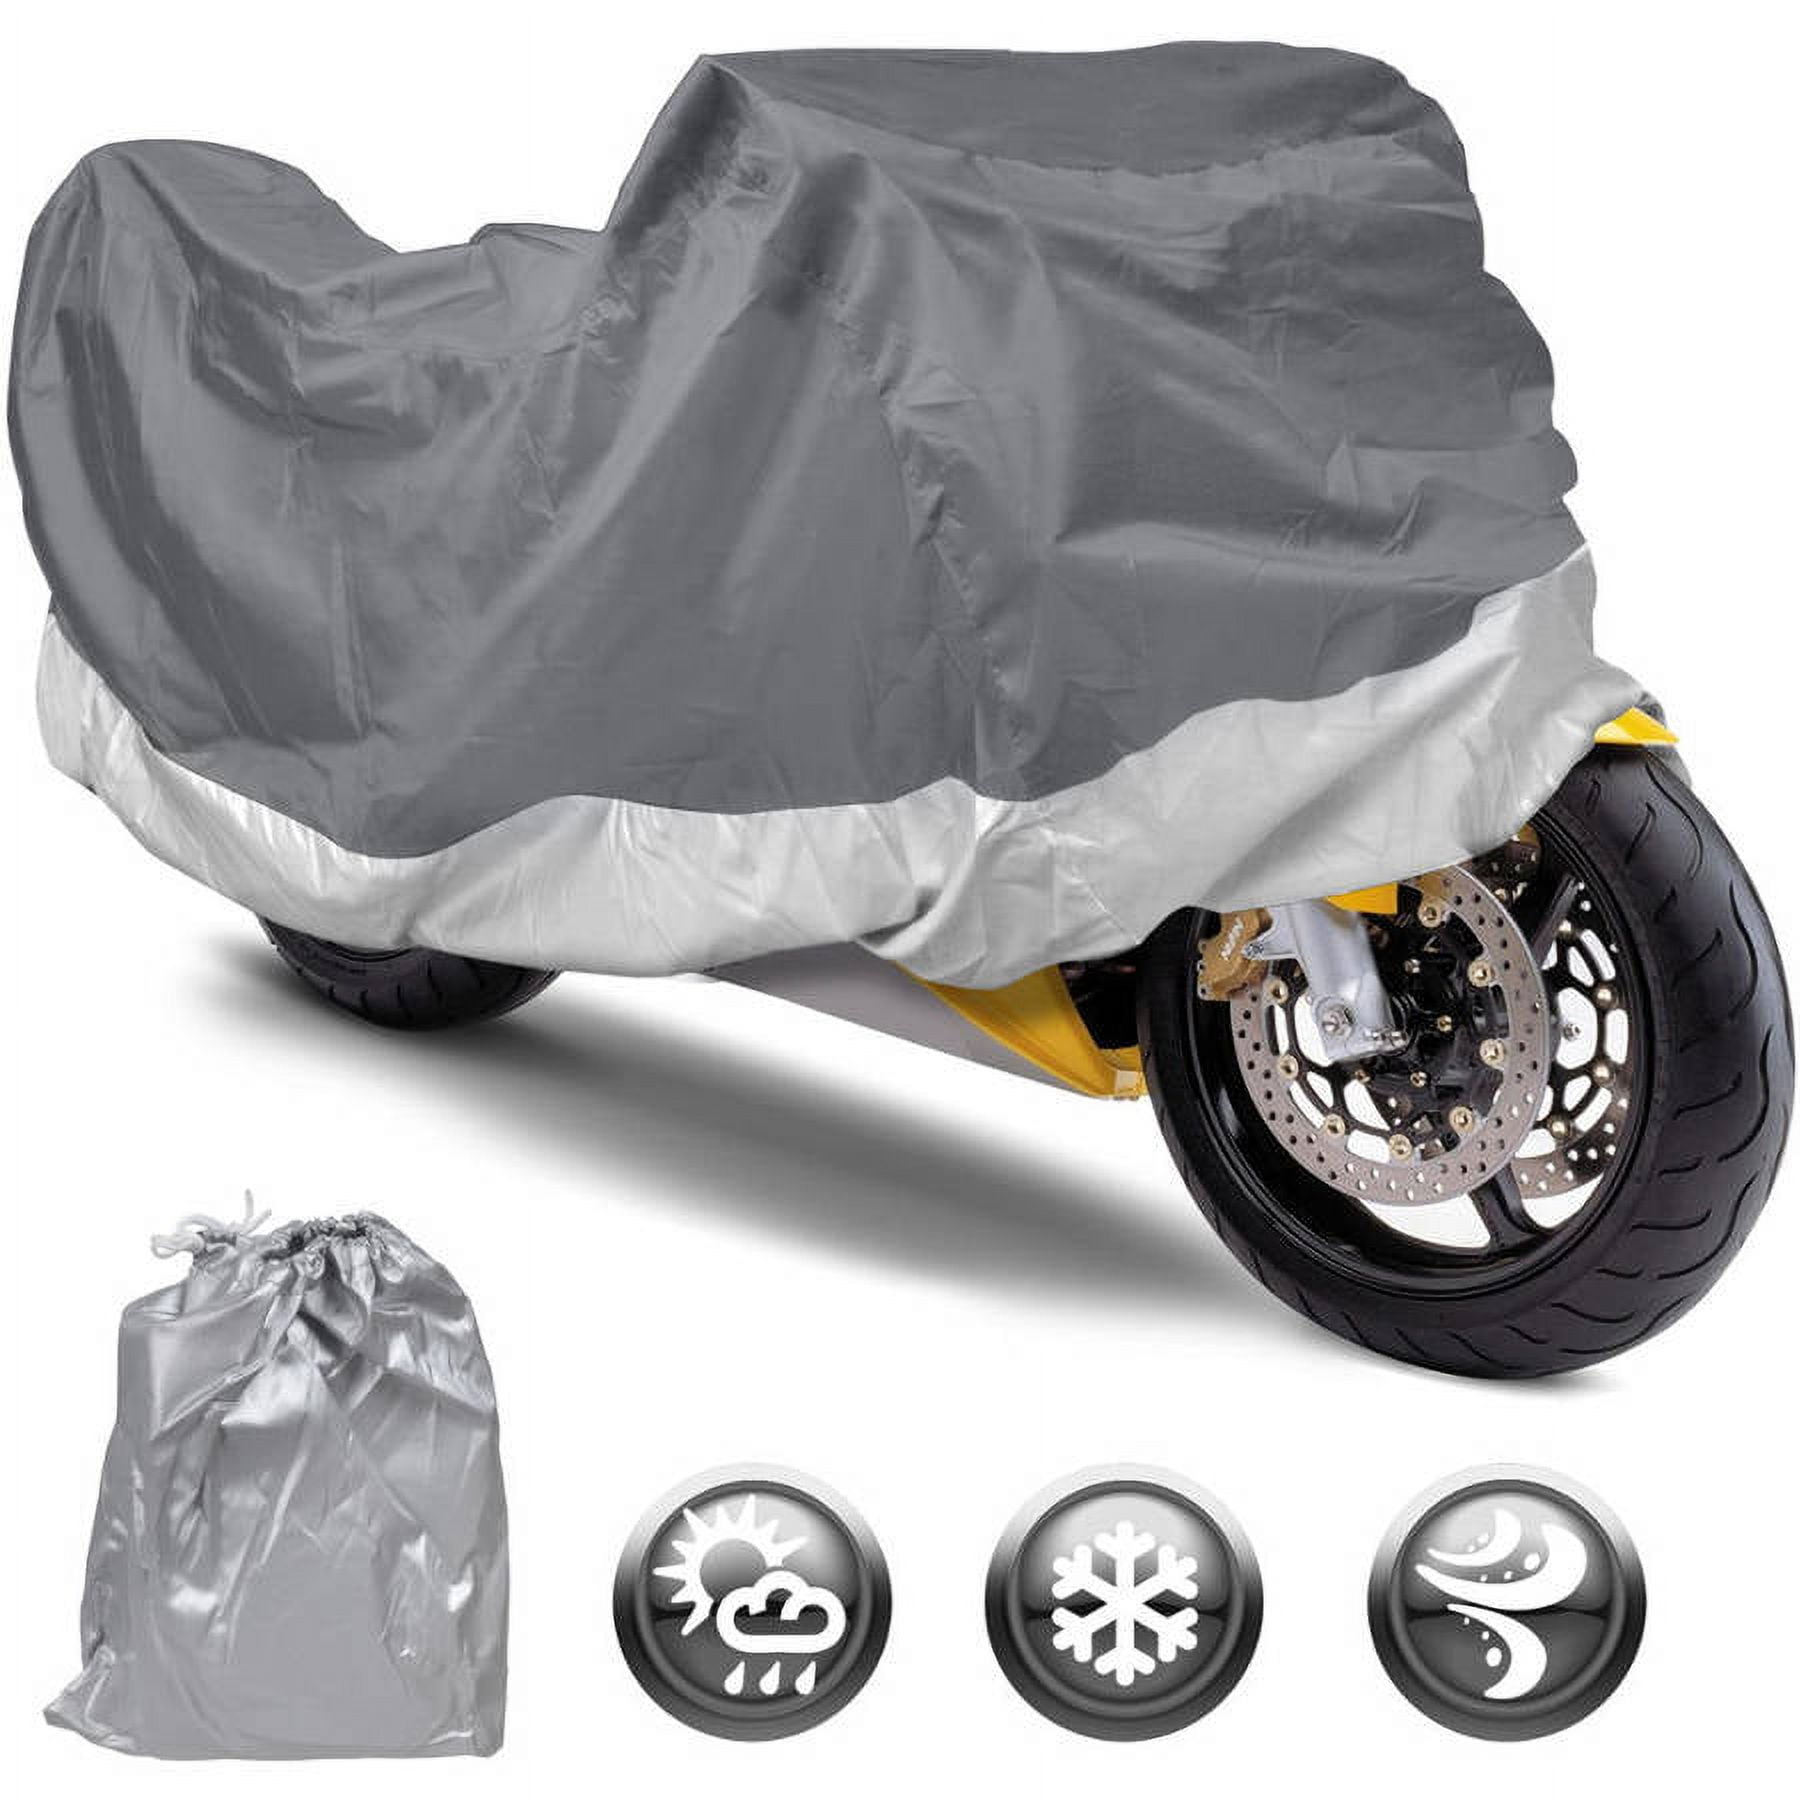 Motorcycle Cover Waterproof Outdoor Motorbike All-Weather Protection, XL2  (104 Inch) 